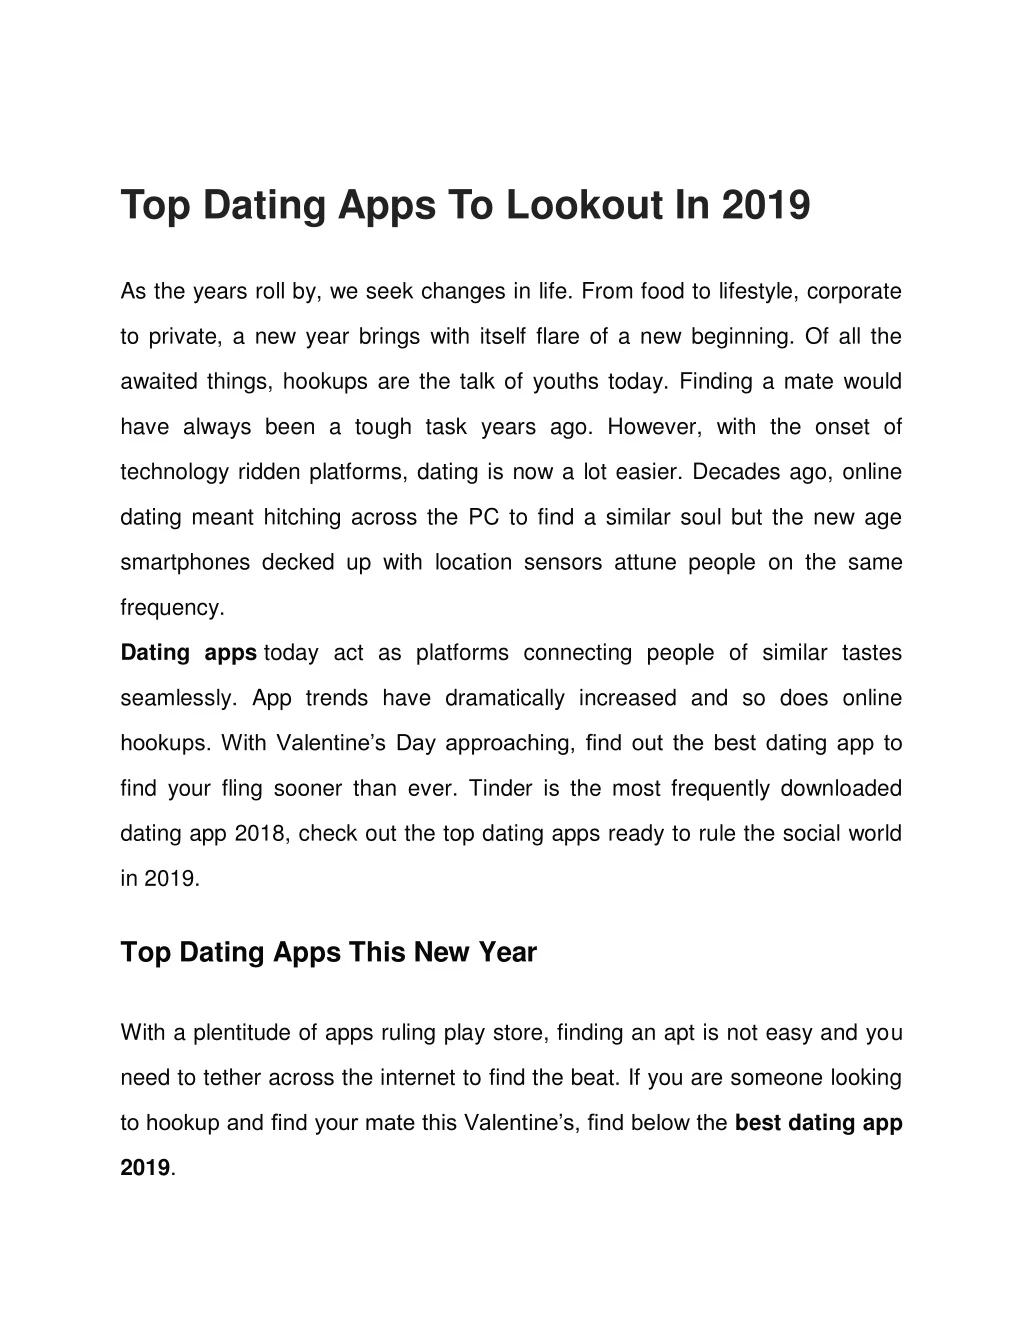 top dating apps to lookout in 2019